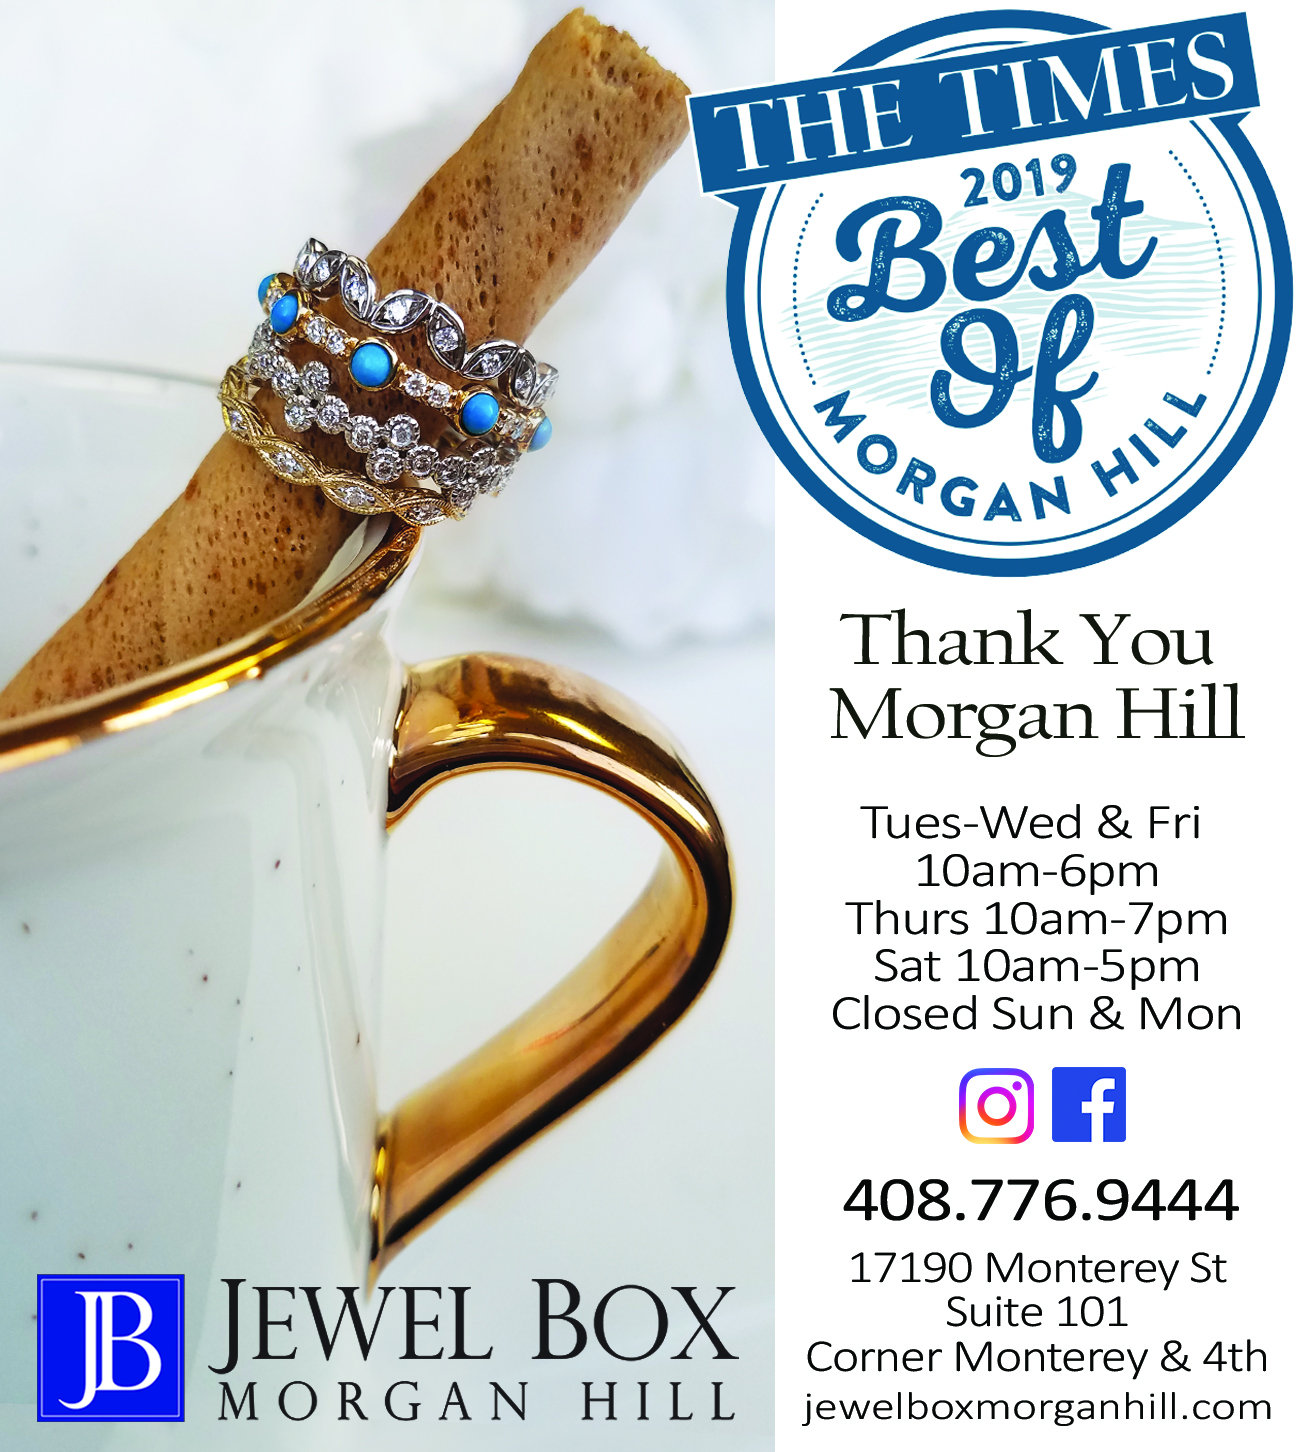 jewel box of morgan hill jewelry and business information